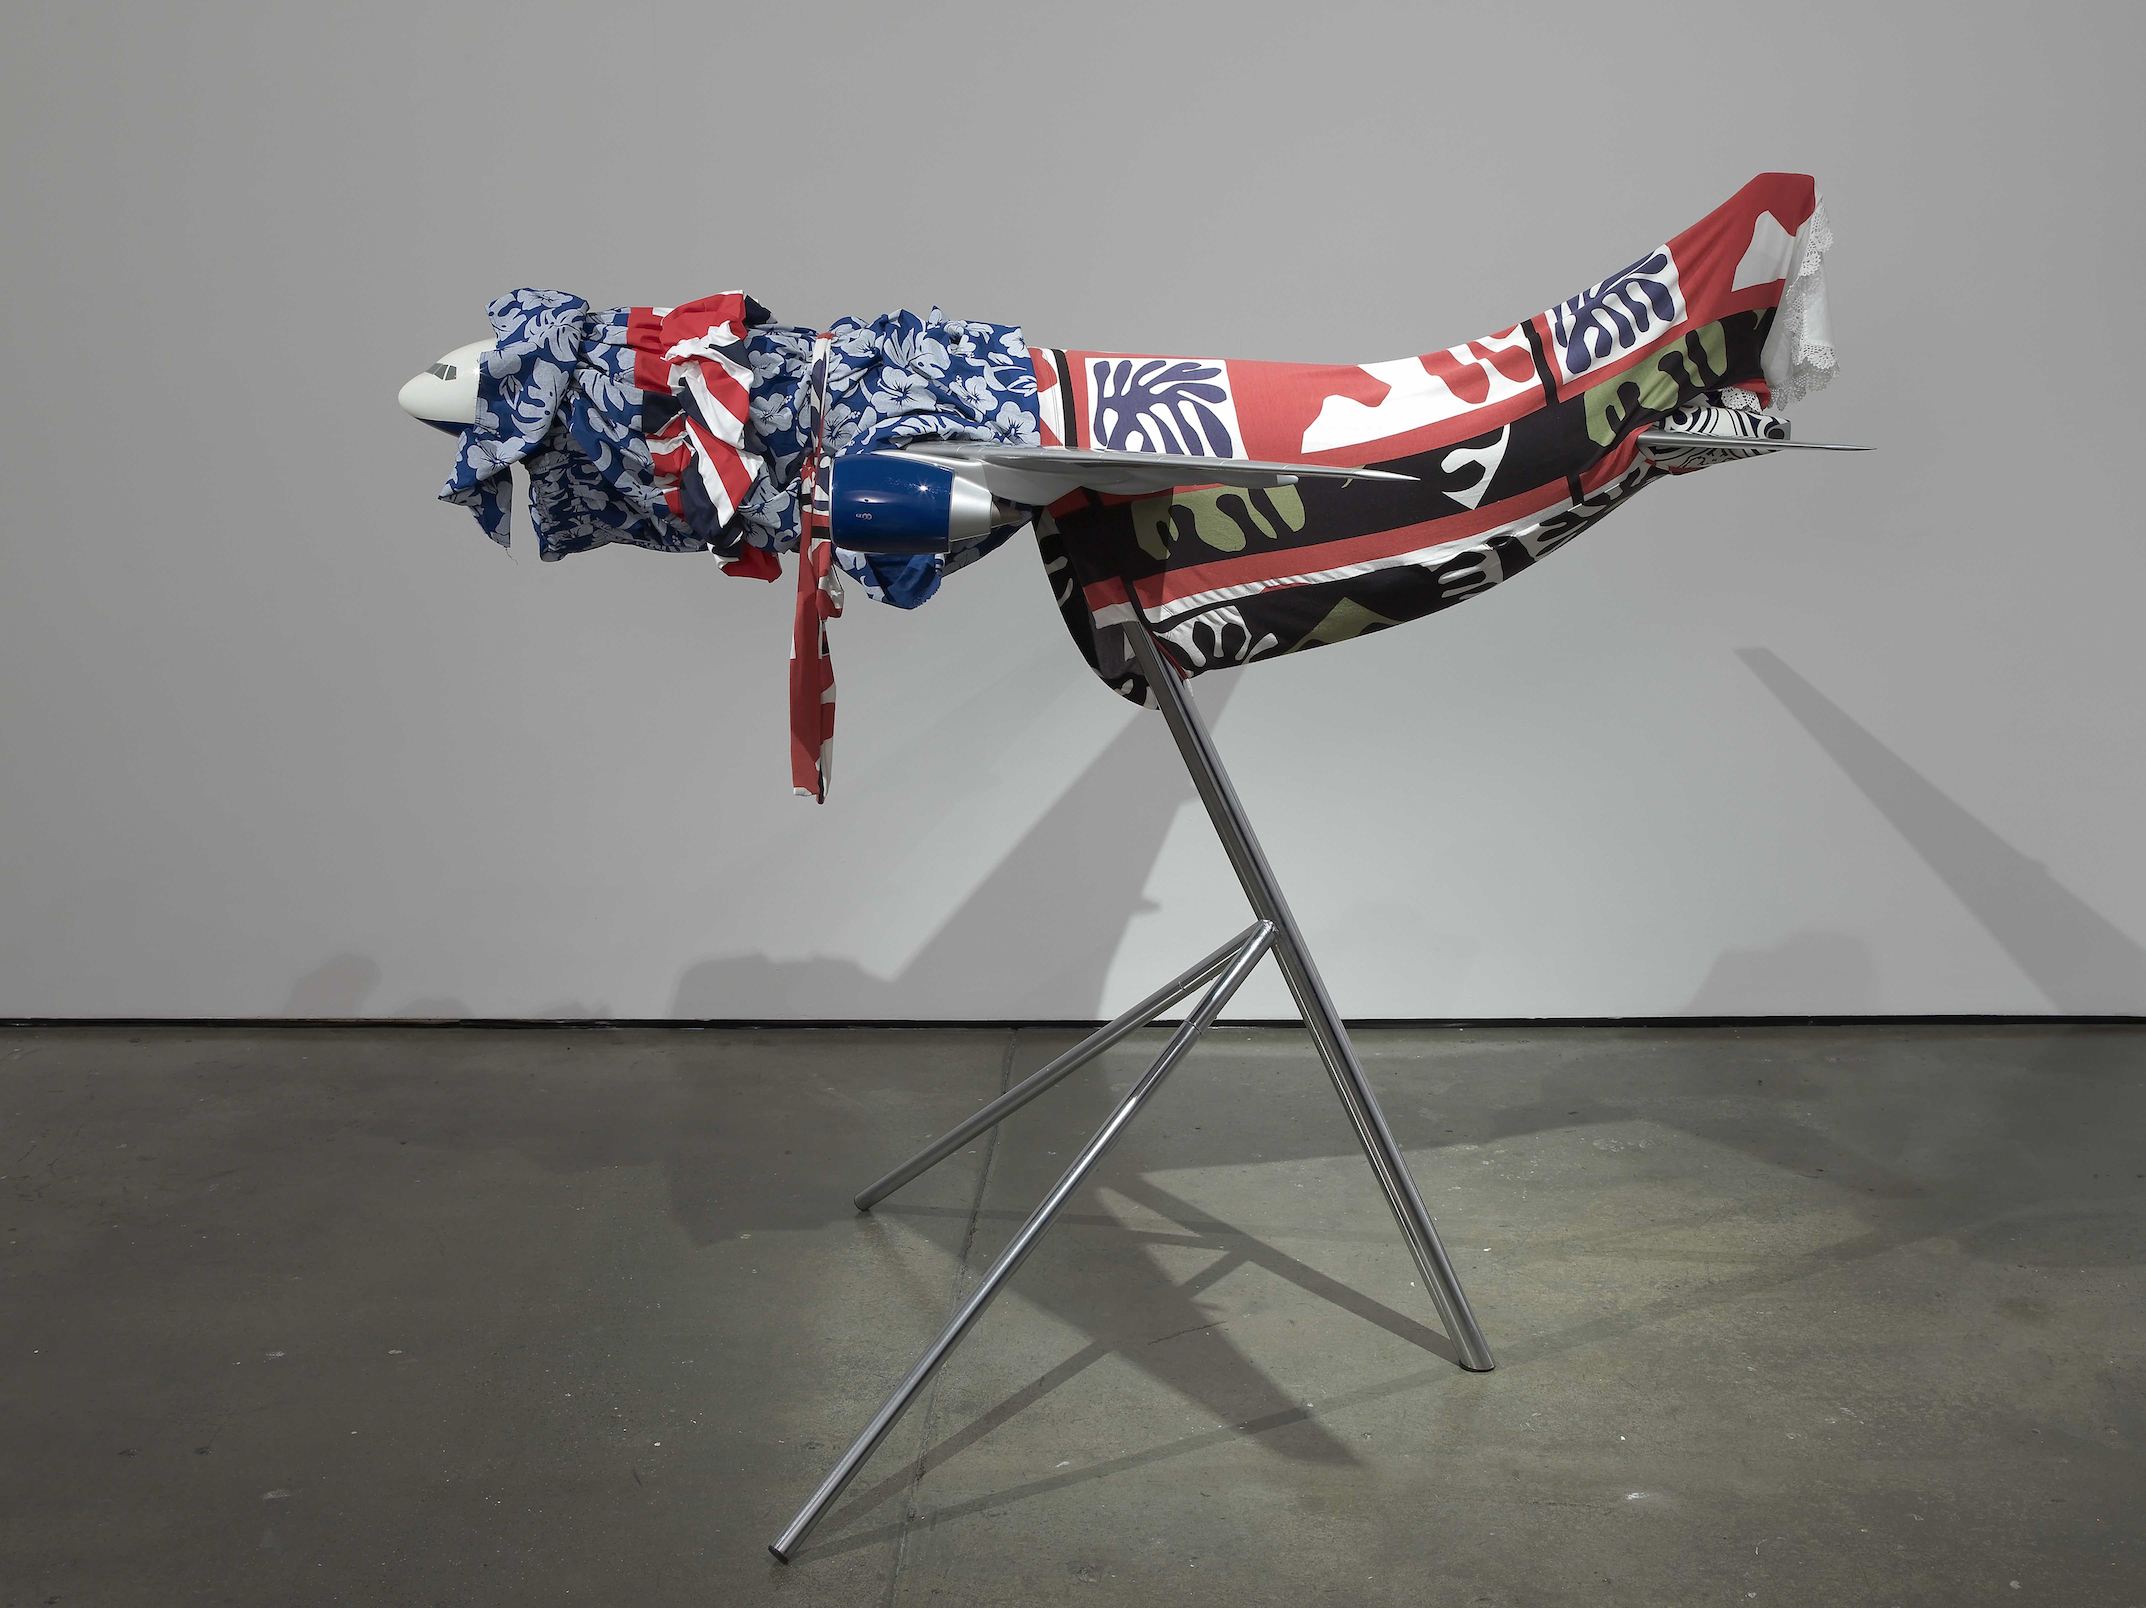     Baby Elephant&nbsp; 2010 Fabric, scale model airplane, stand 156 x 183 x 157 cm / 61.5 x 72 x 67 in 